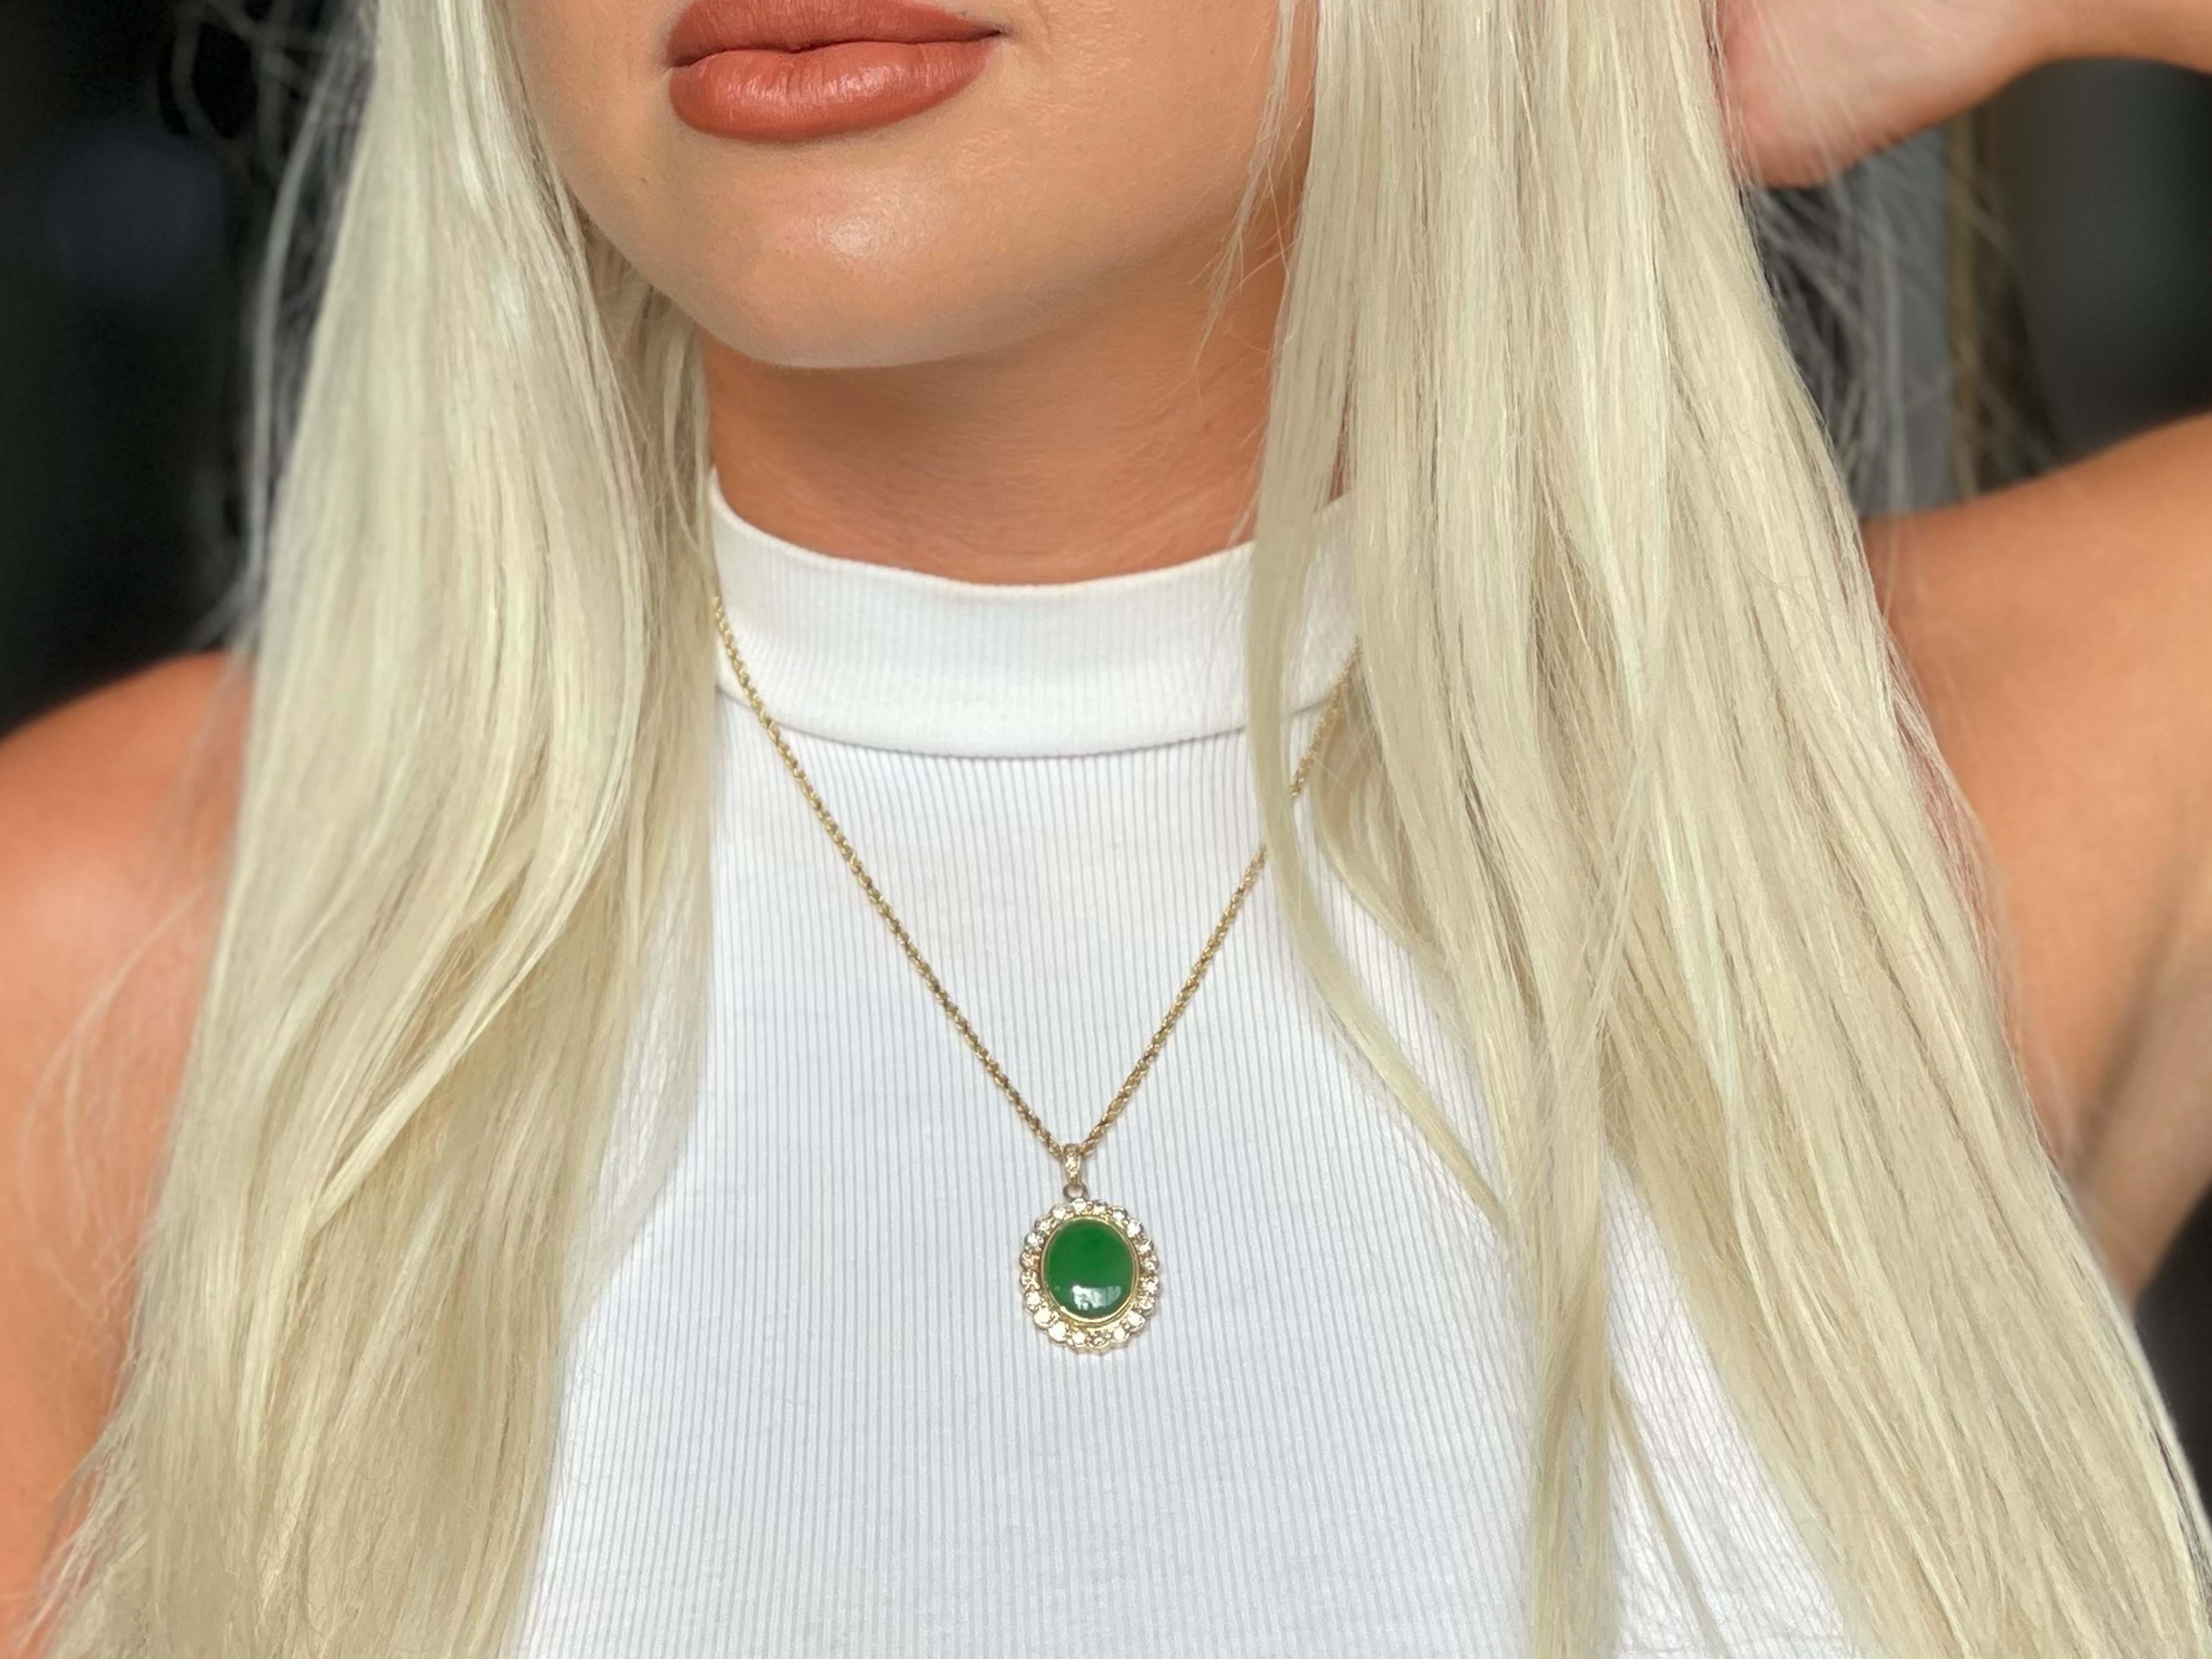 GIA Vintage Oval Cabochon Green Translucent Jadeite Jade and Diamond Pendant in 14k Yellow Gold. This stunning pendant is set with a gorgeous oval shape double cabochon green jadeite jade with a round brilliant diamond halo. The center Jadeite Jade